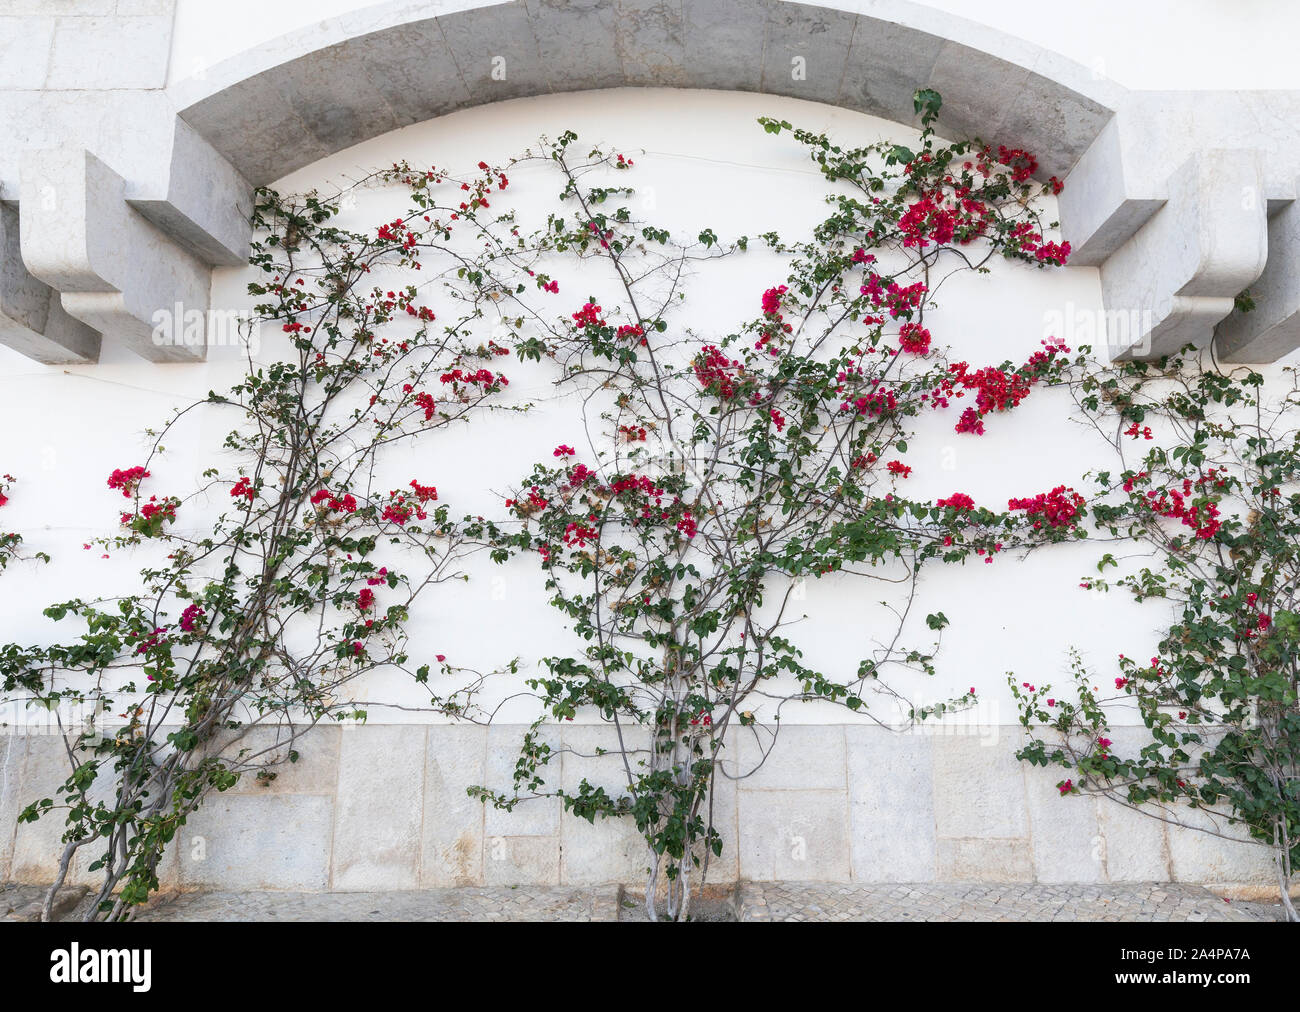 Flowering vine plant on a white stone wall, viewed from the front. Stock Photo